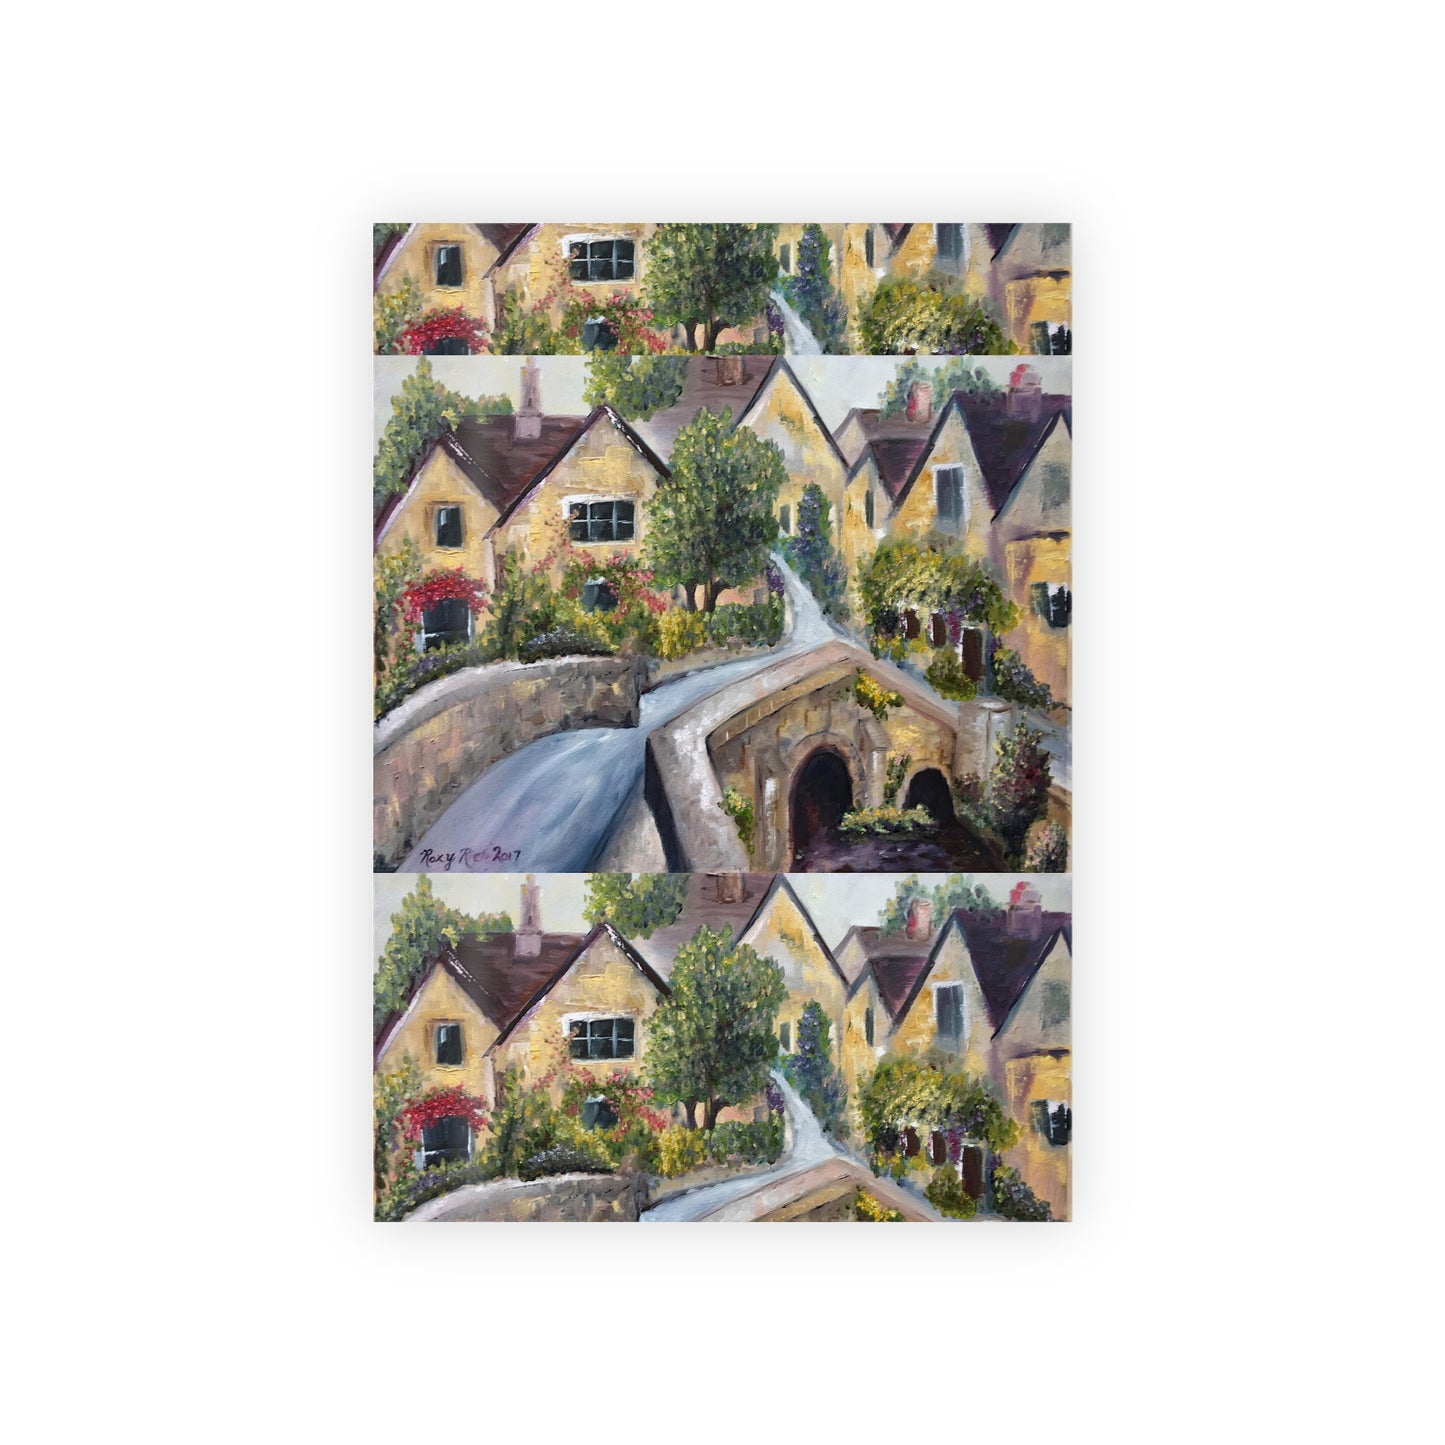 Original Oil Painting Castle Combe Cotswolds Wilshire printed Gift Wrapping Paper Rolls, 1pc